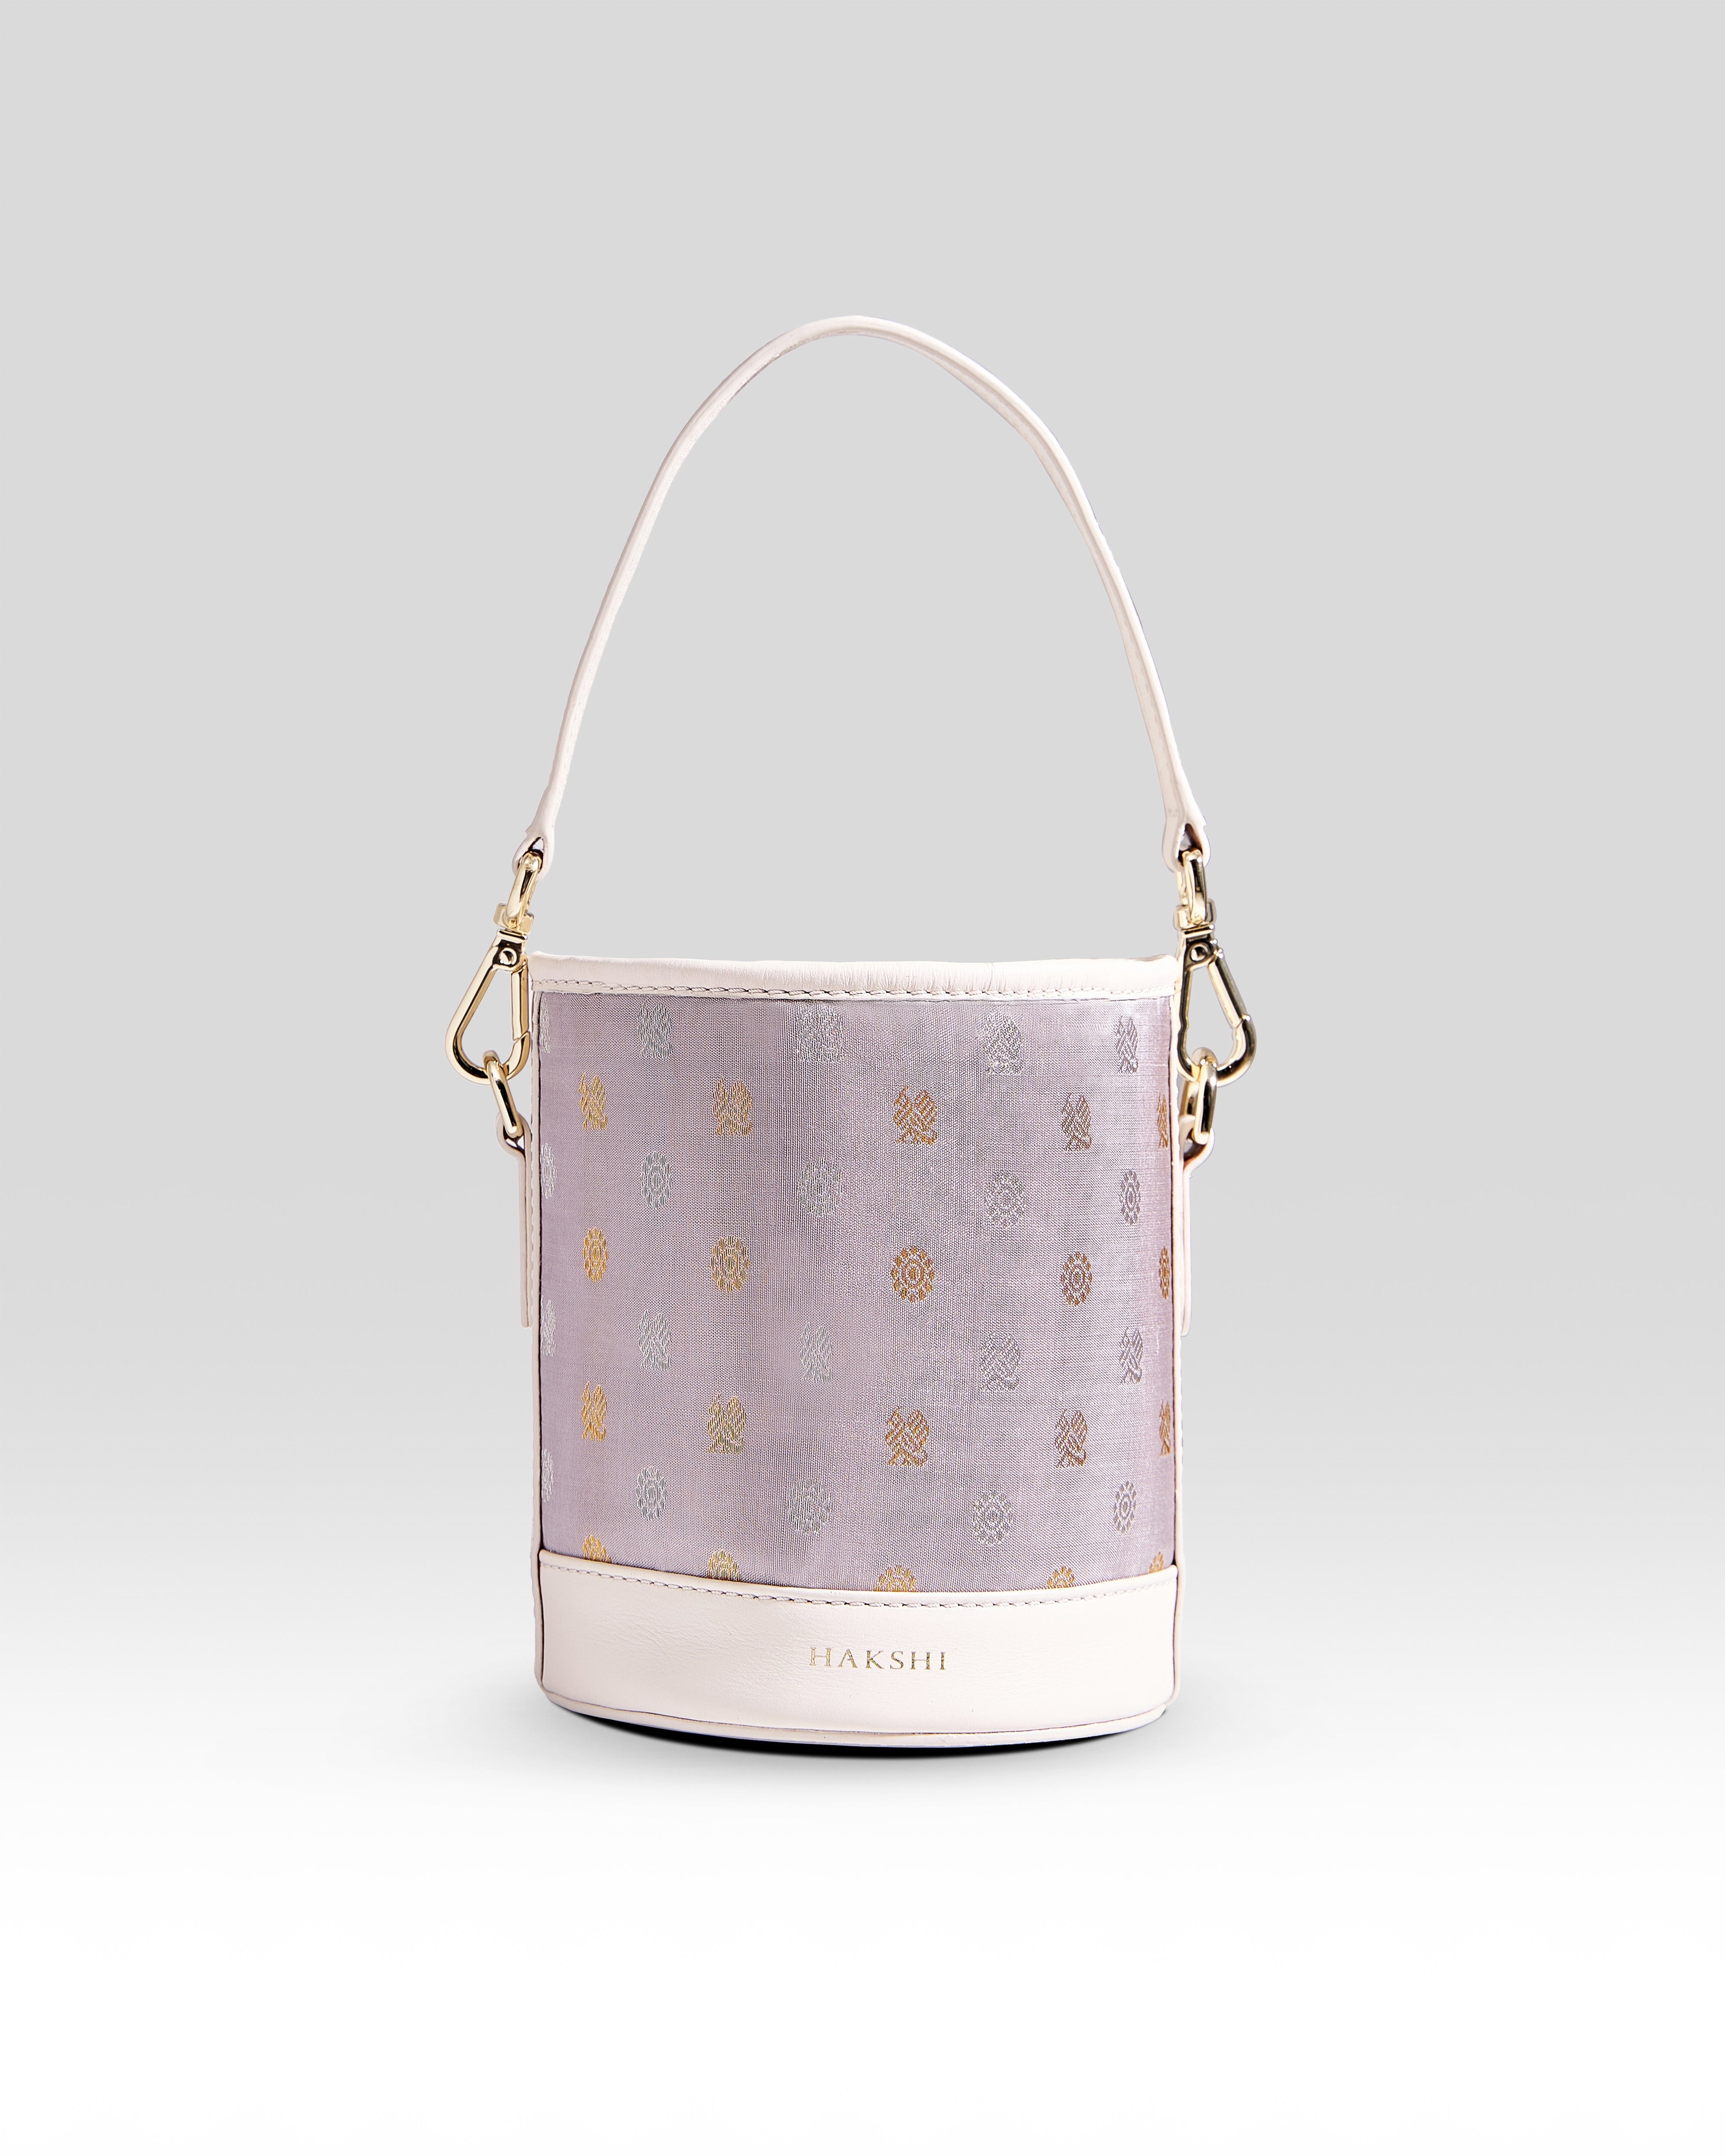 Adhya Bucket Bag in Grey & Ivory: A stylish and versatile accessory featuring a chic color combination, perfect for adding a touch of sophistication to any outfit